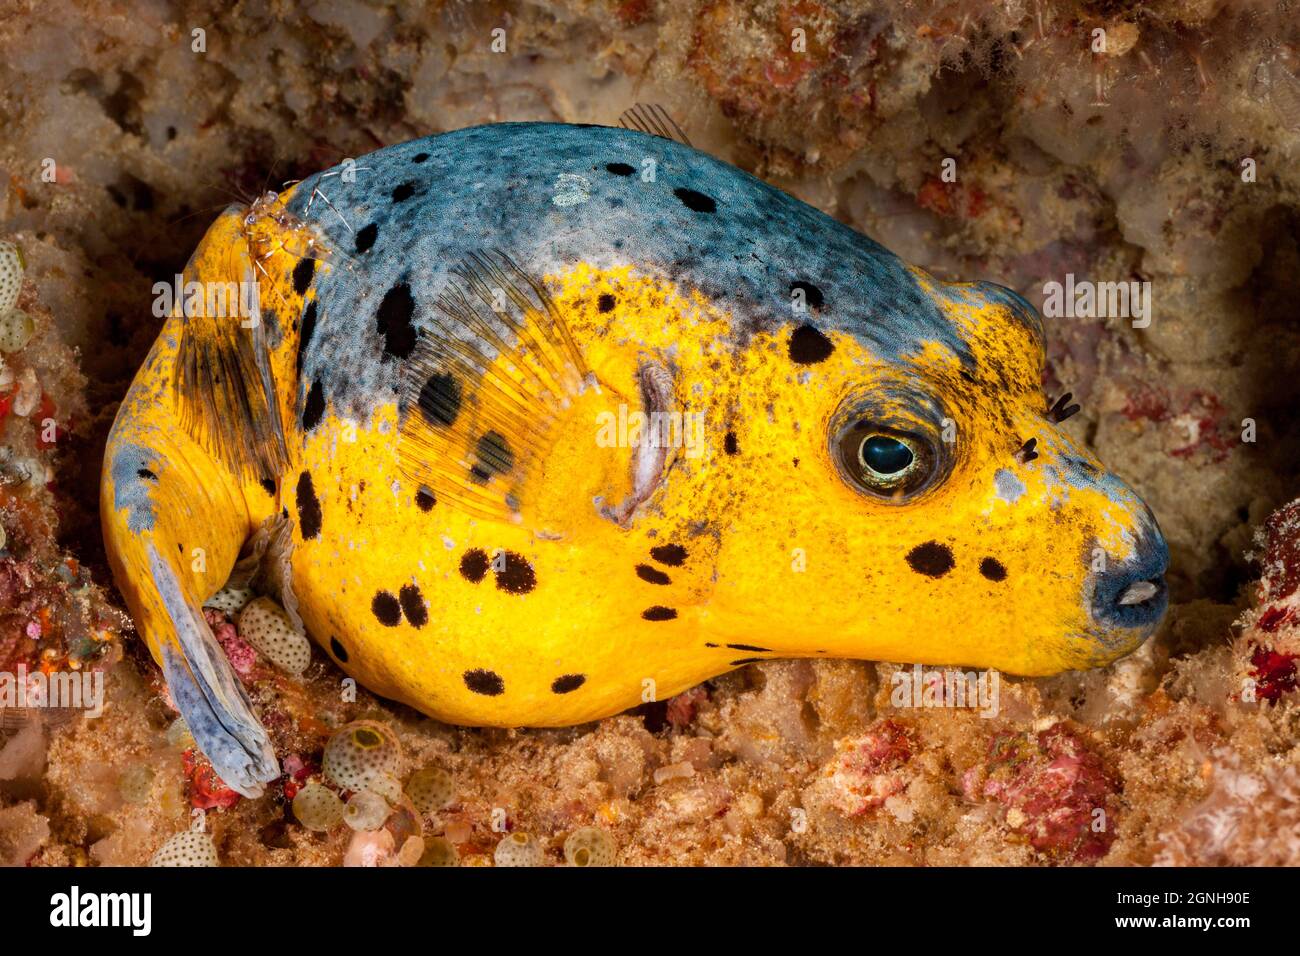 This blackspotted puffer or dog-faced puffer, Arothron nigropunctatus, is curled up on the reef for the night, Philippines, Southeast Asia. A transpar Stock Photo